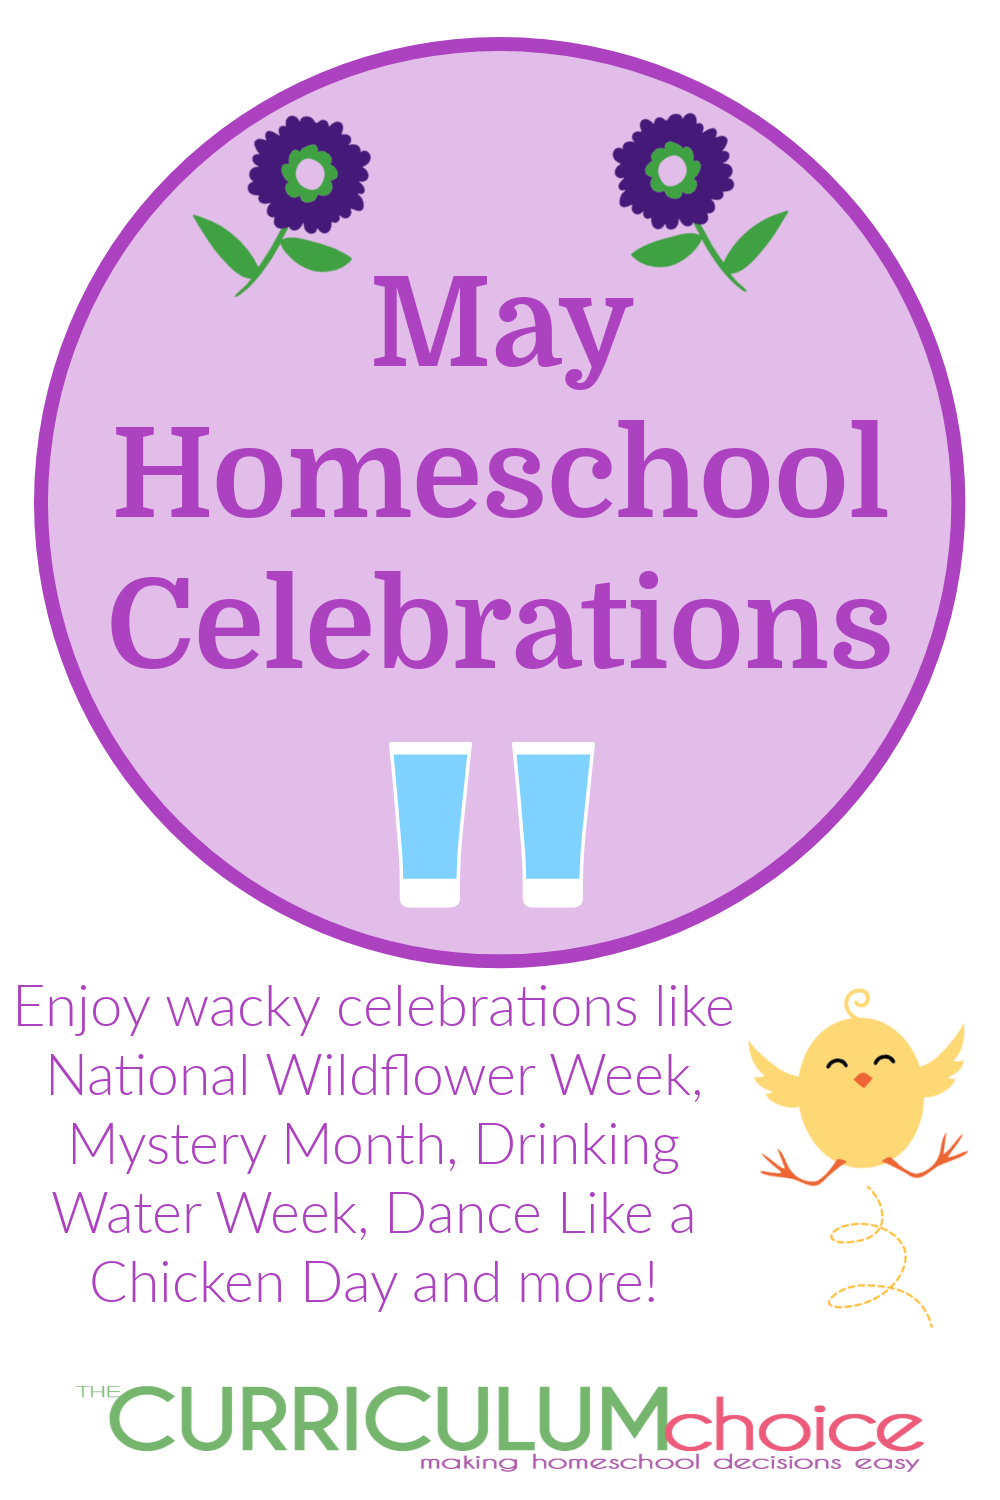 Try some wacky May homeschool celebrations like Dance Like a Chicken, Mystery Month, National Wildflower Week and more!